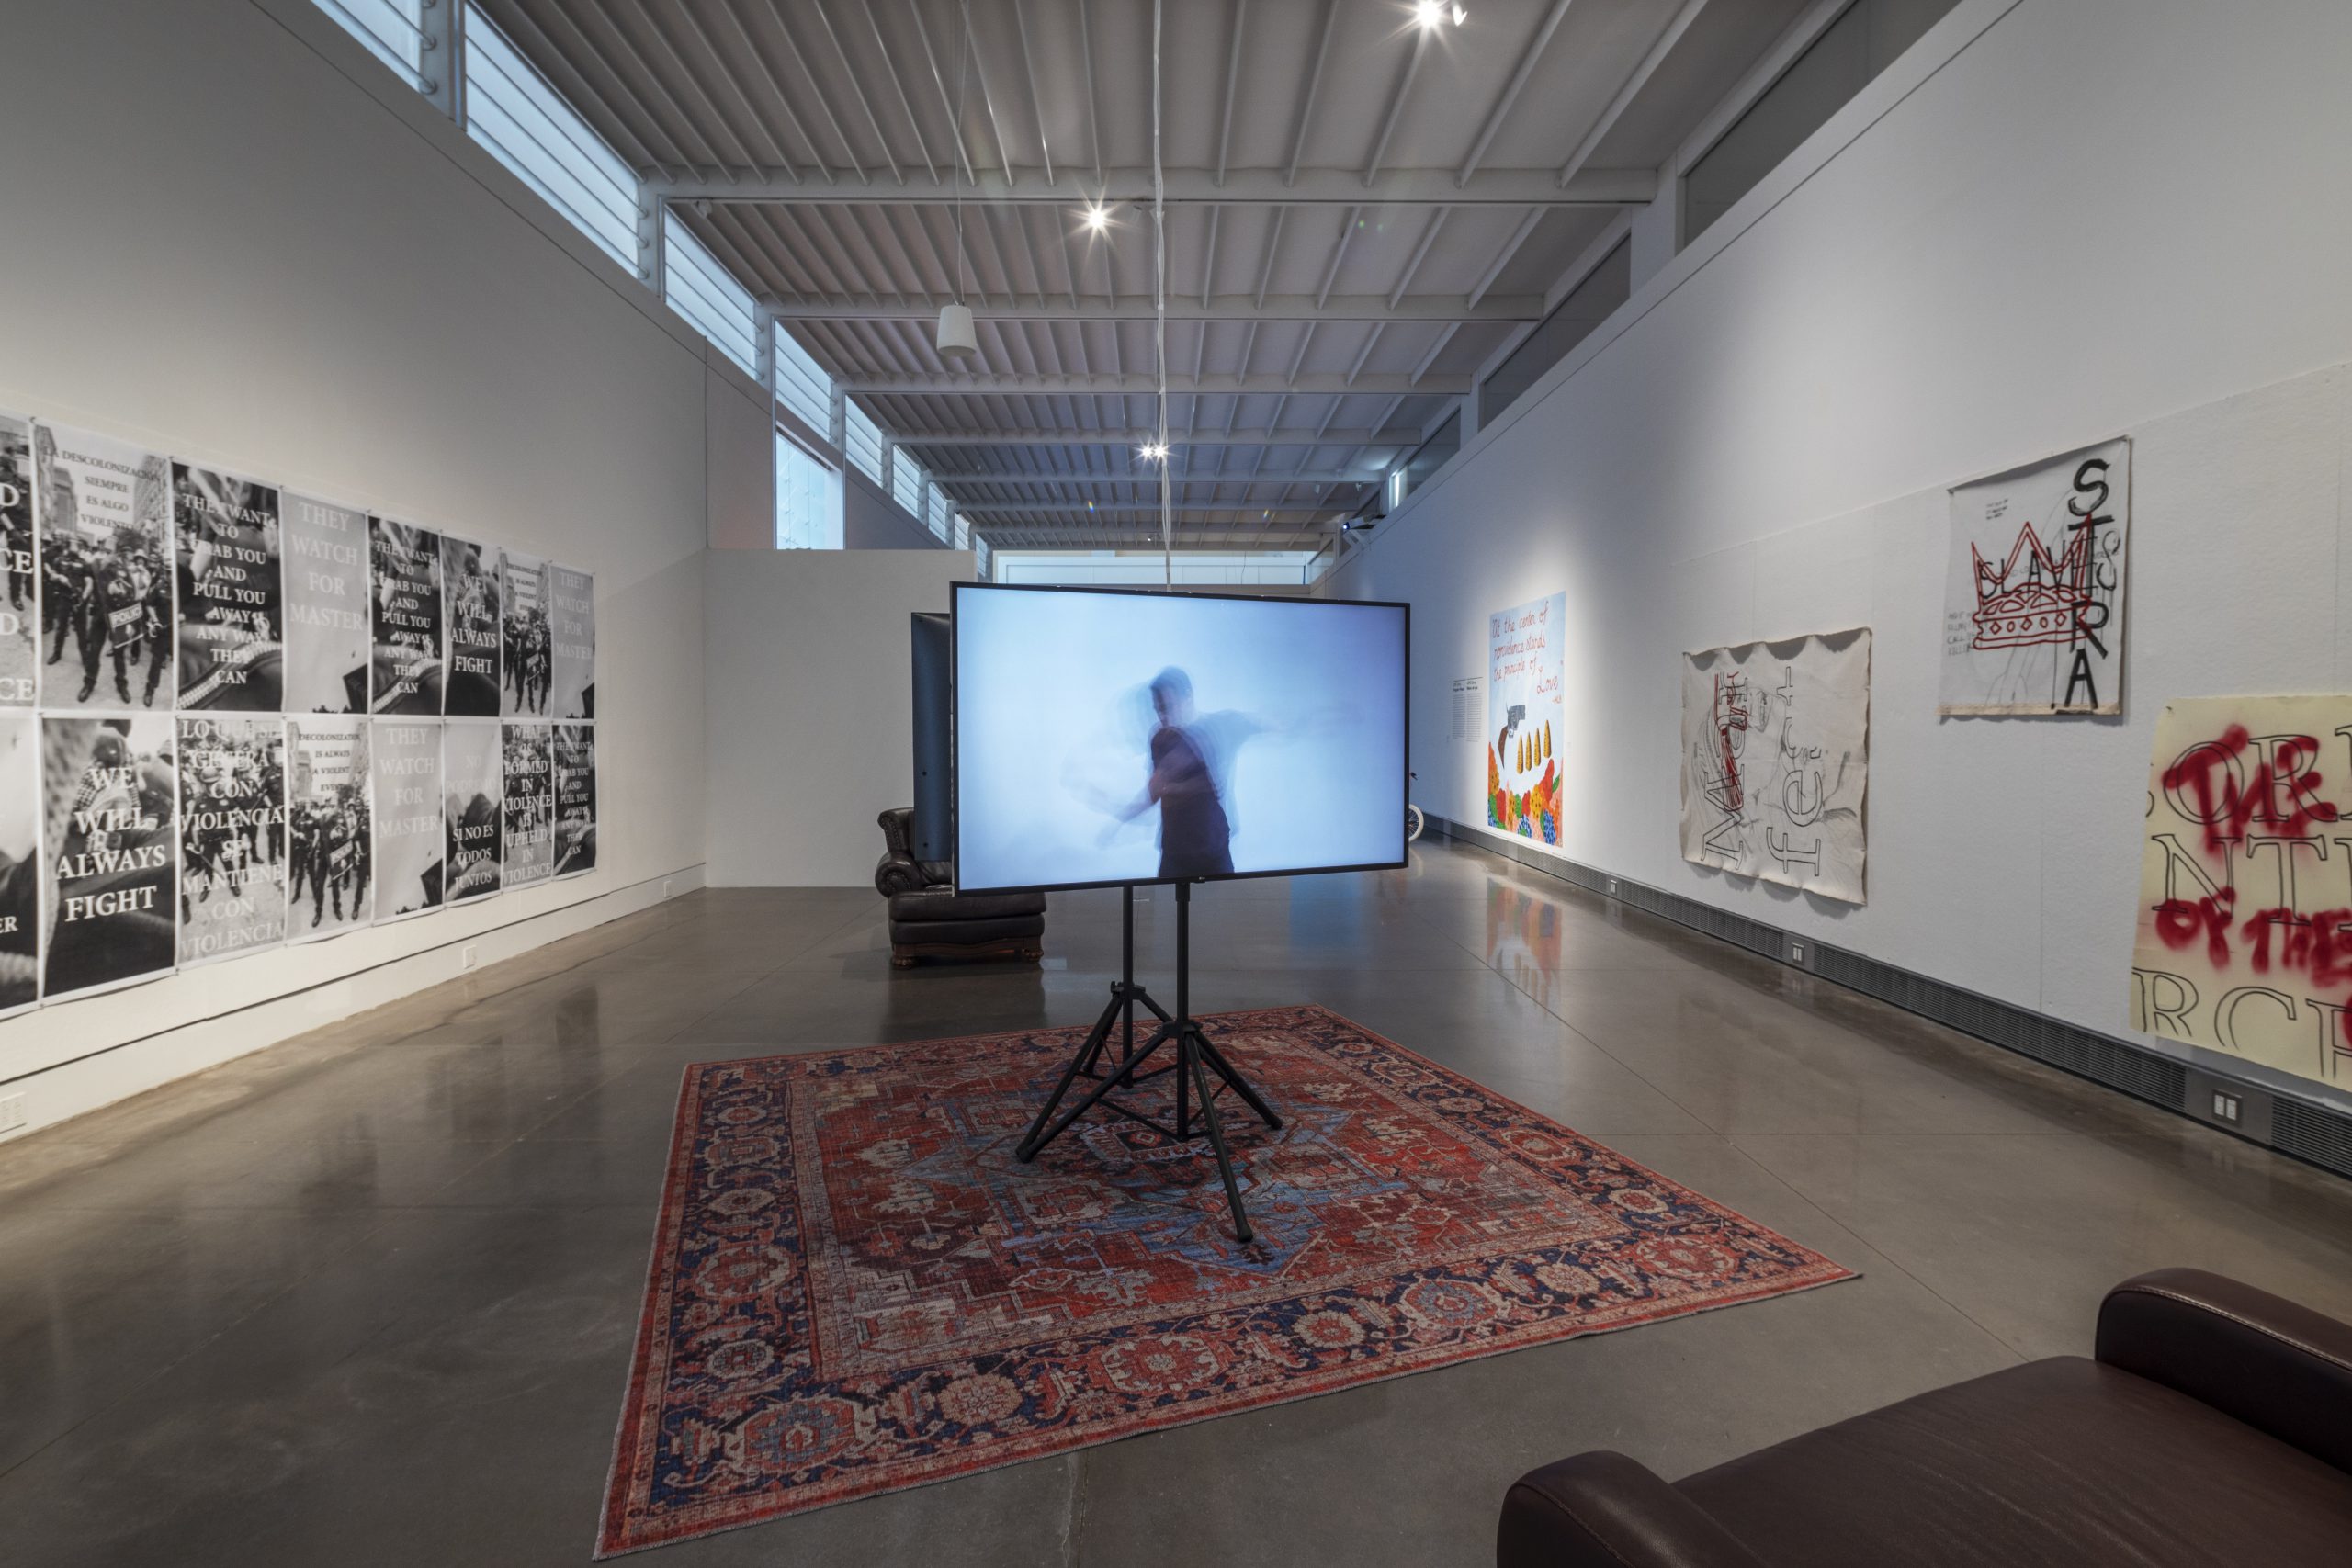 In the center are two TV’s back to back attached to a stand on a decorative square rug. On the left, posters of black and white images from the June 4th, 2020 Bronx protests with a variety of slogans. On the right, mixed medium drawings in red and black pinned to the wall.